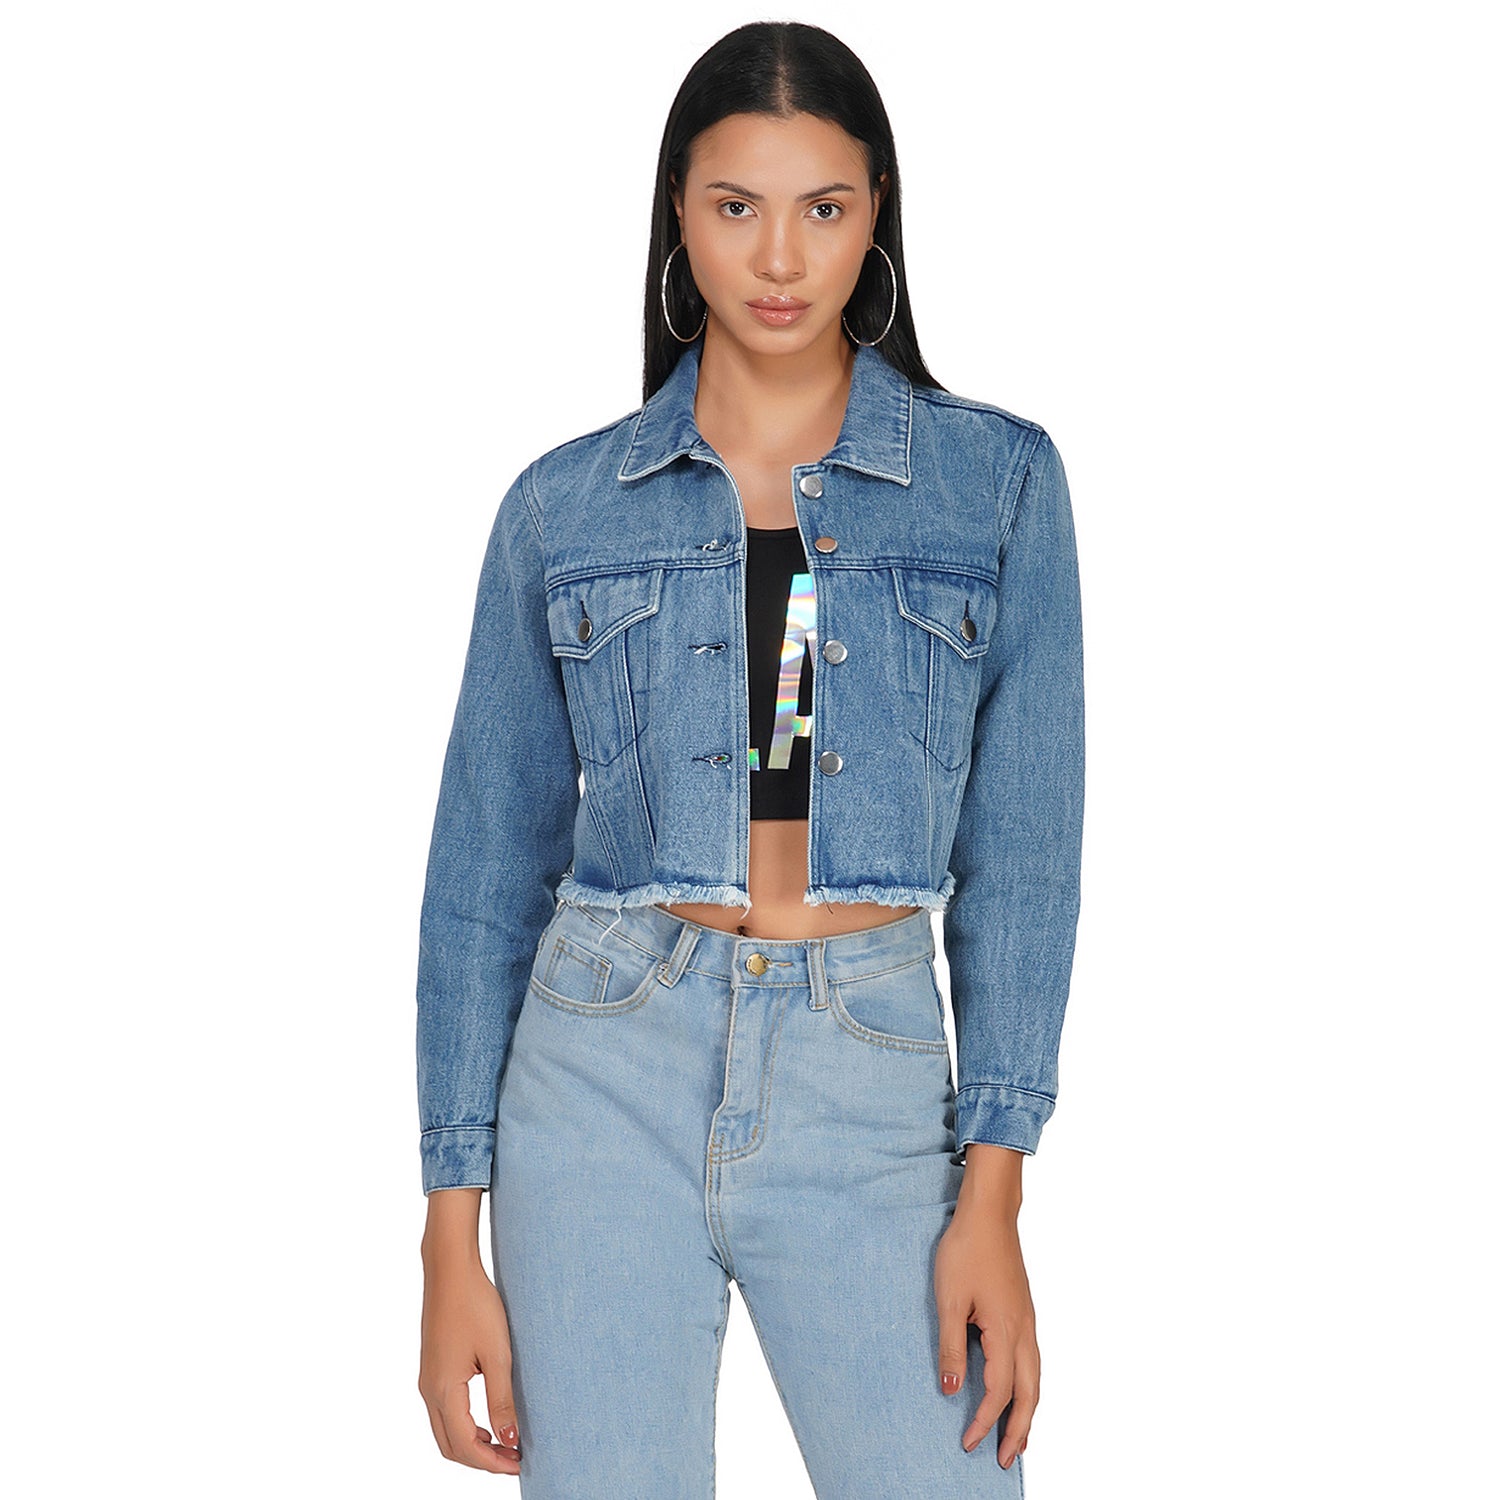 Drindf womens distressed jean jackets lightweight cropped India | Ubuy